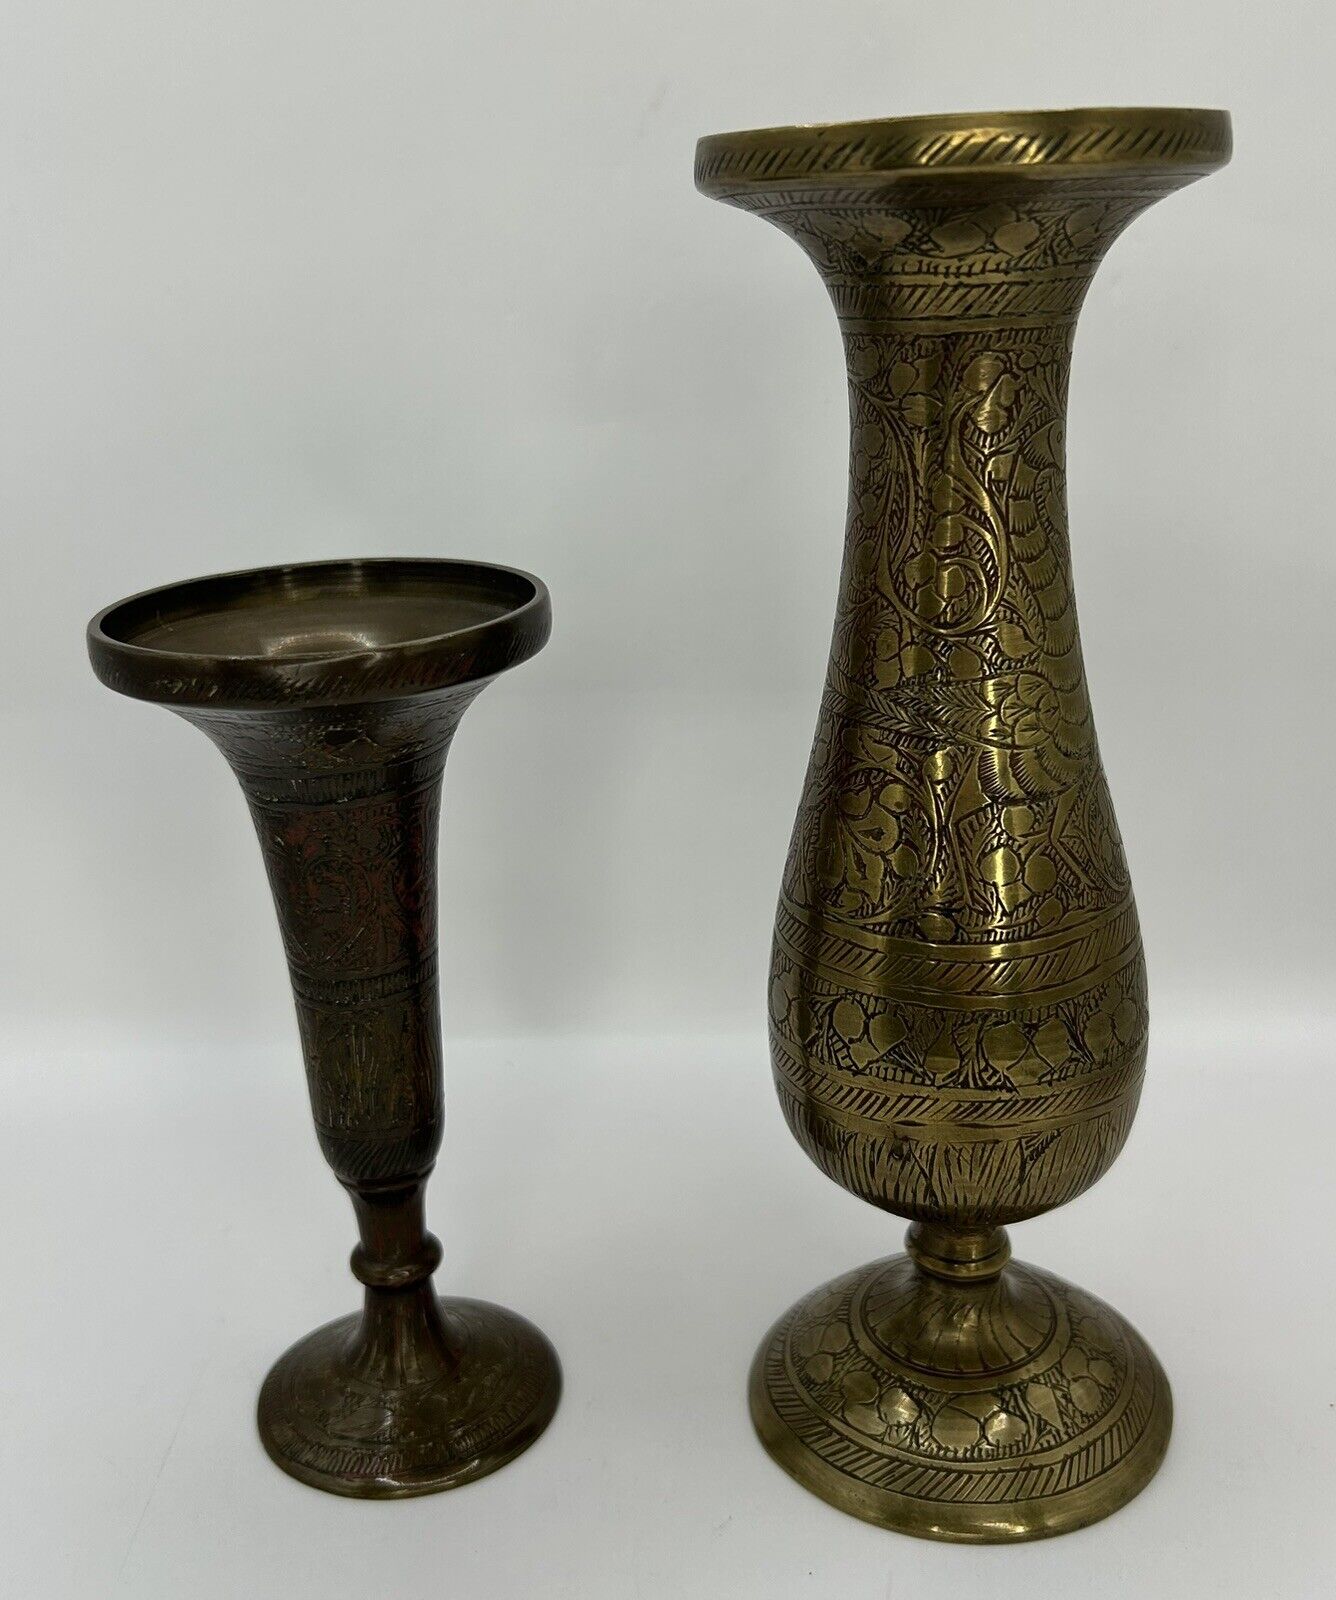 Two Brass Etched Vase Set, 5 1/4” X 2 1/4” & 7 1/2” X 2 1/4”